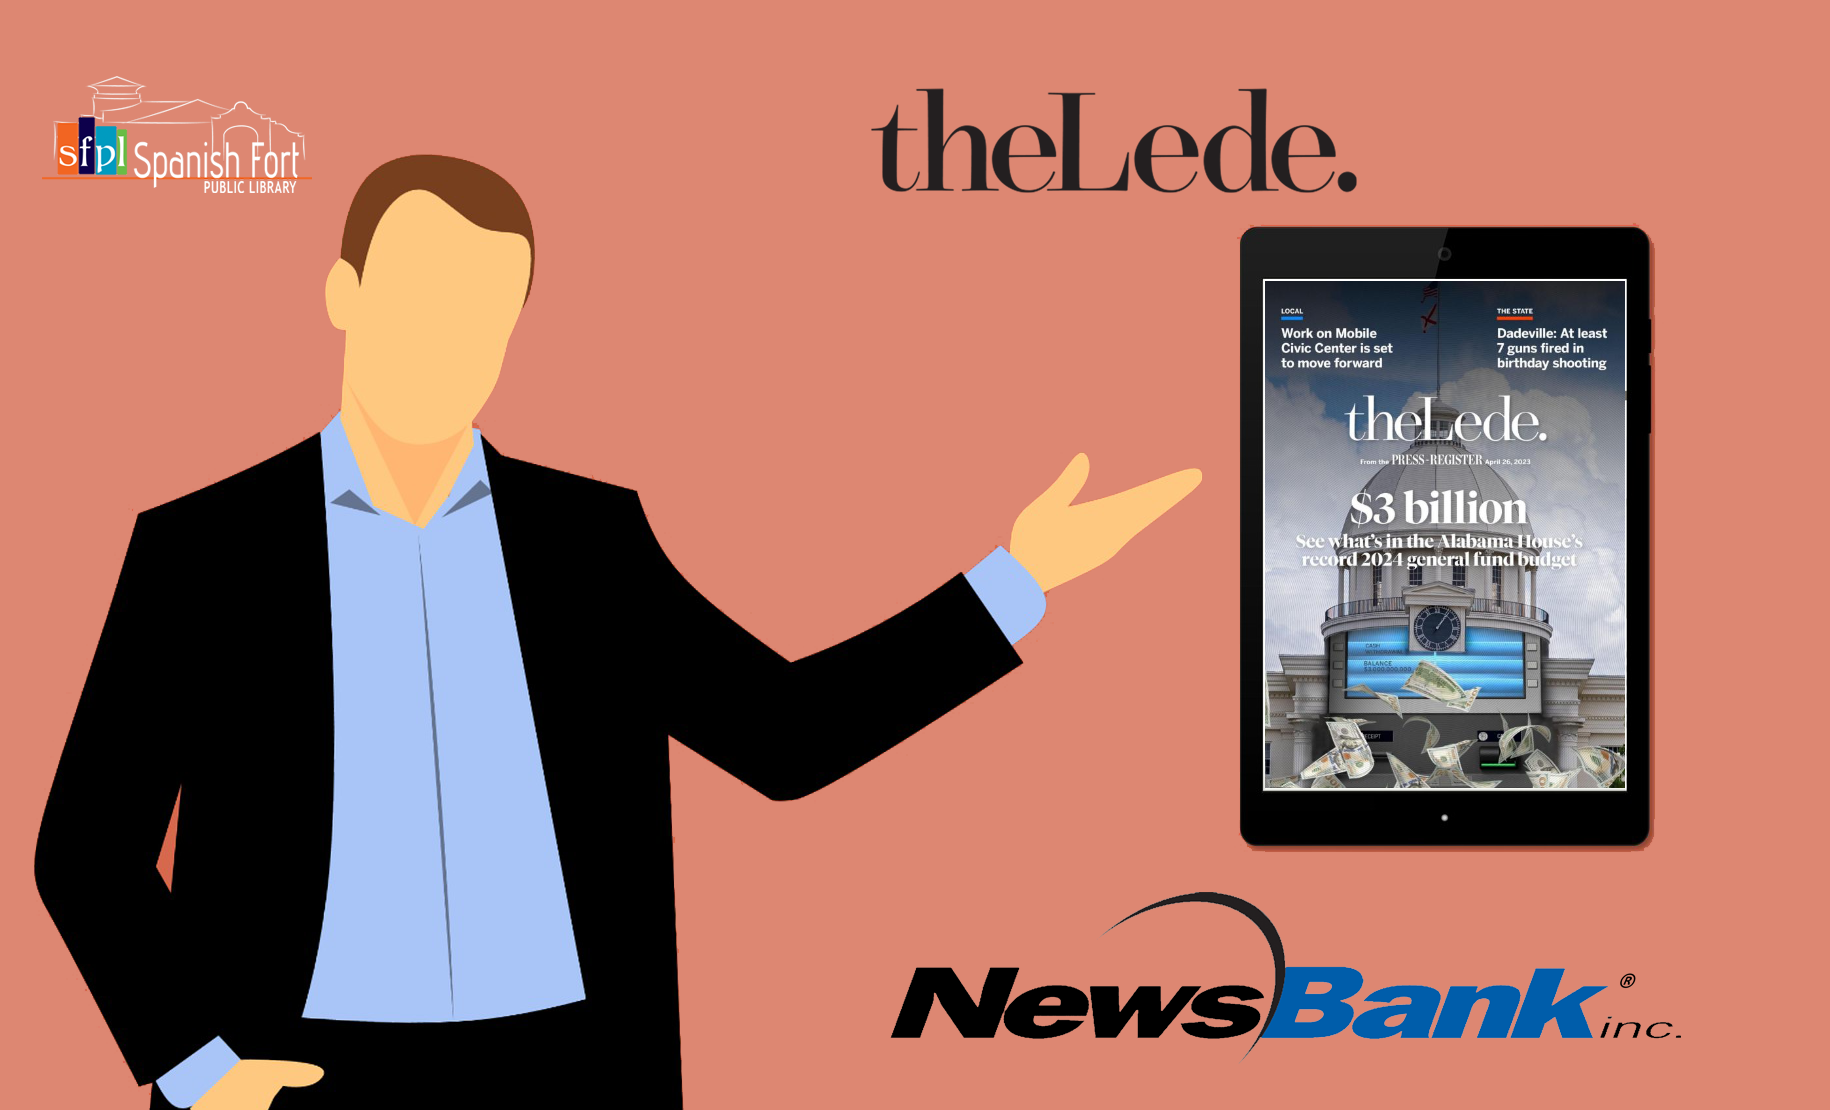 The Lede is now available to SFPL cardholders through NewsBank: The Mobile Lede offers "all the latest local news — seven days a week Local news, regional and state-wide roundups, sports, obituaries, opinion, interactive puzzles and comics." from AL.com